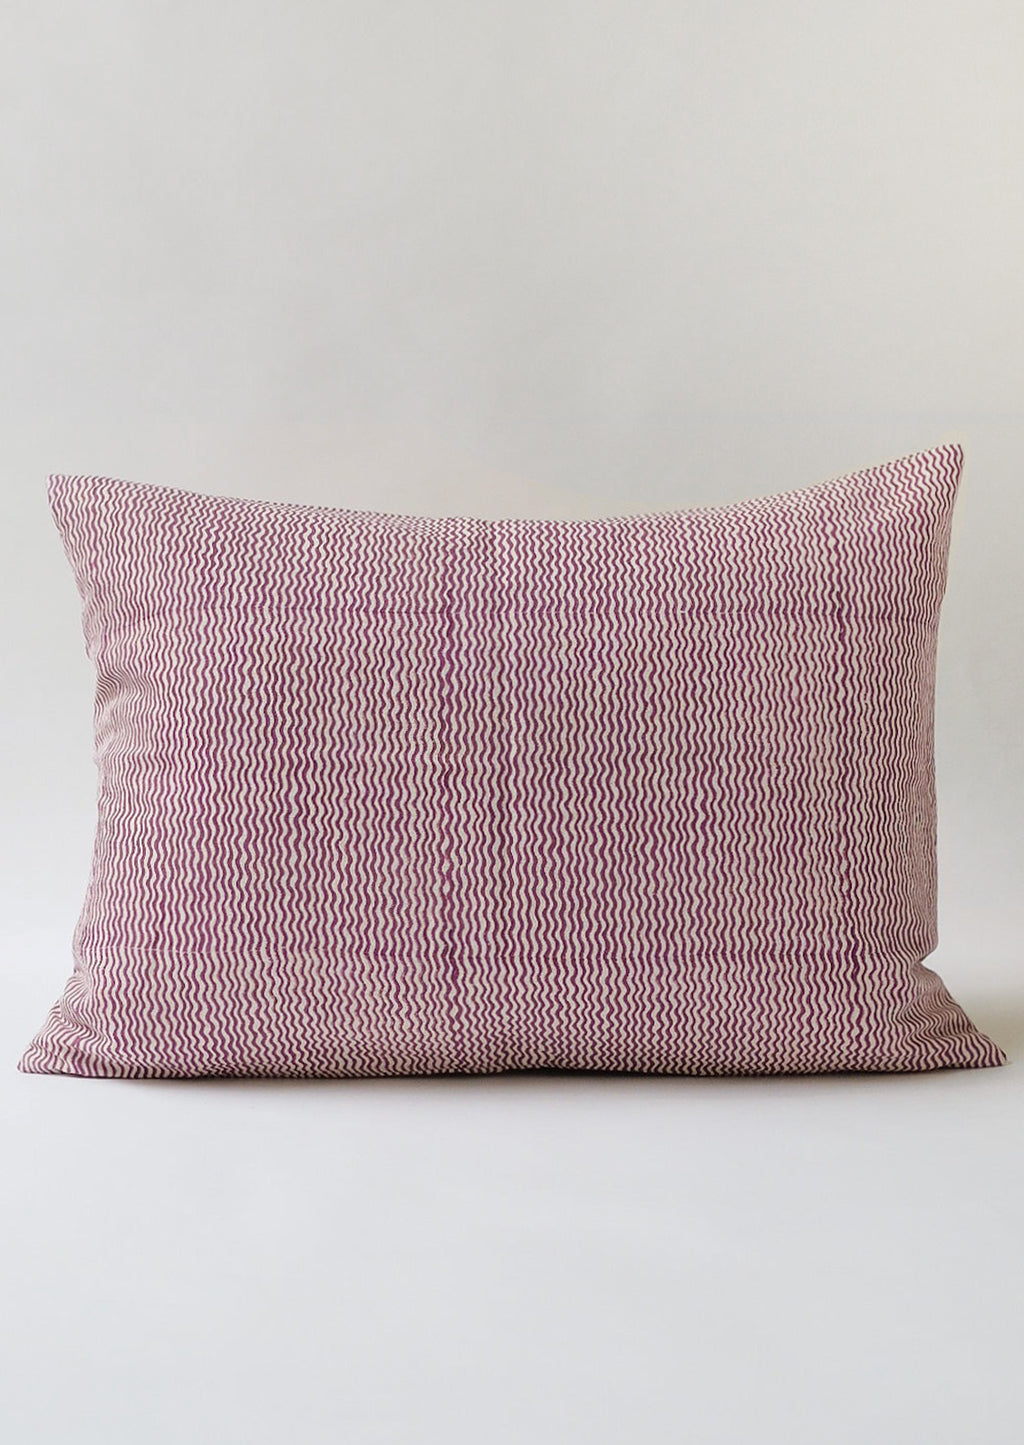 2: A lumbar throw pillow with wavy purple lines.